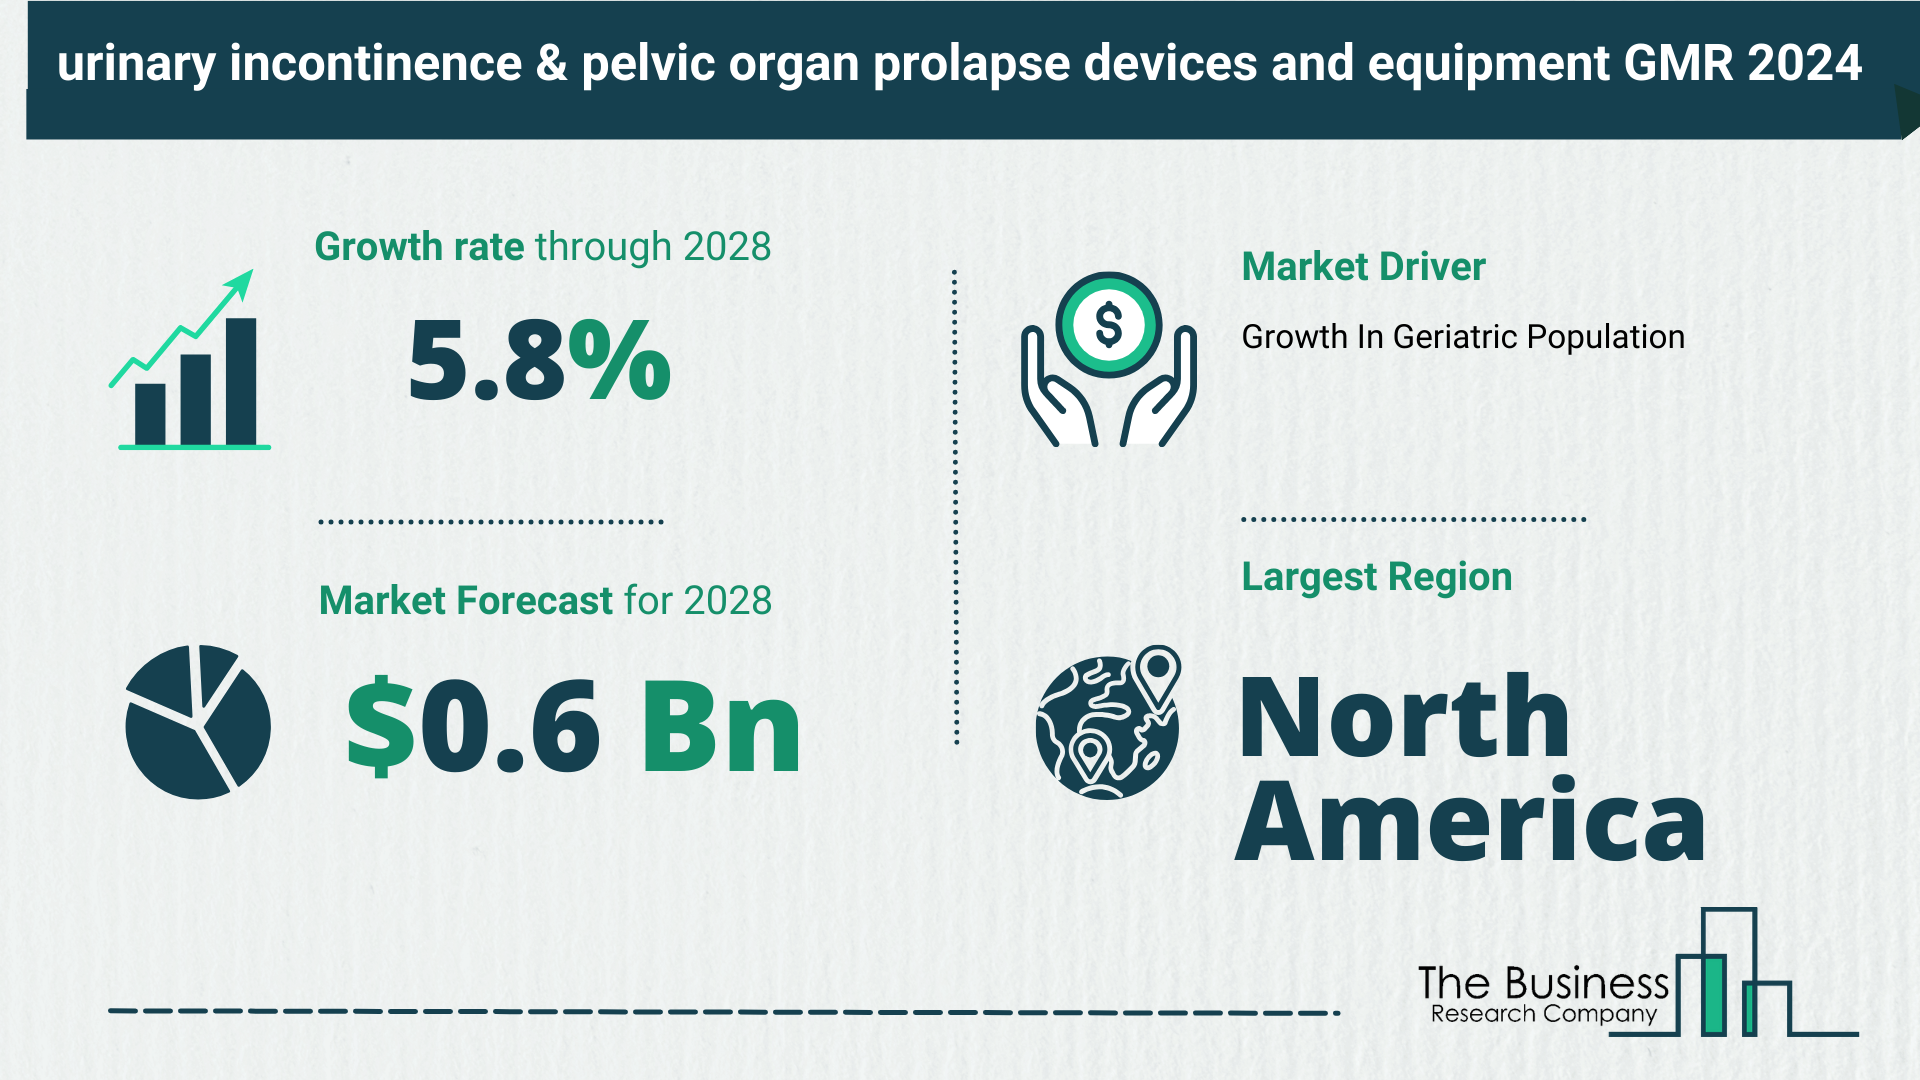 Key Trends And Drivers In The Urinary Incontinence & Pelvic Organ Prolapse Devices And Equipment Market 2024